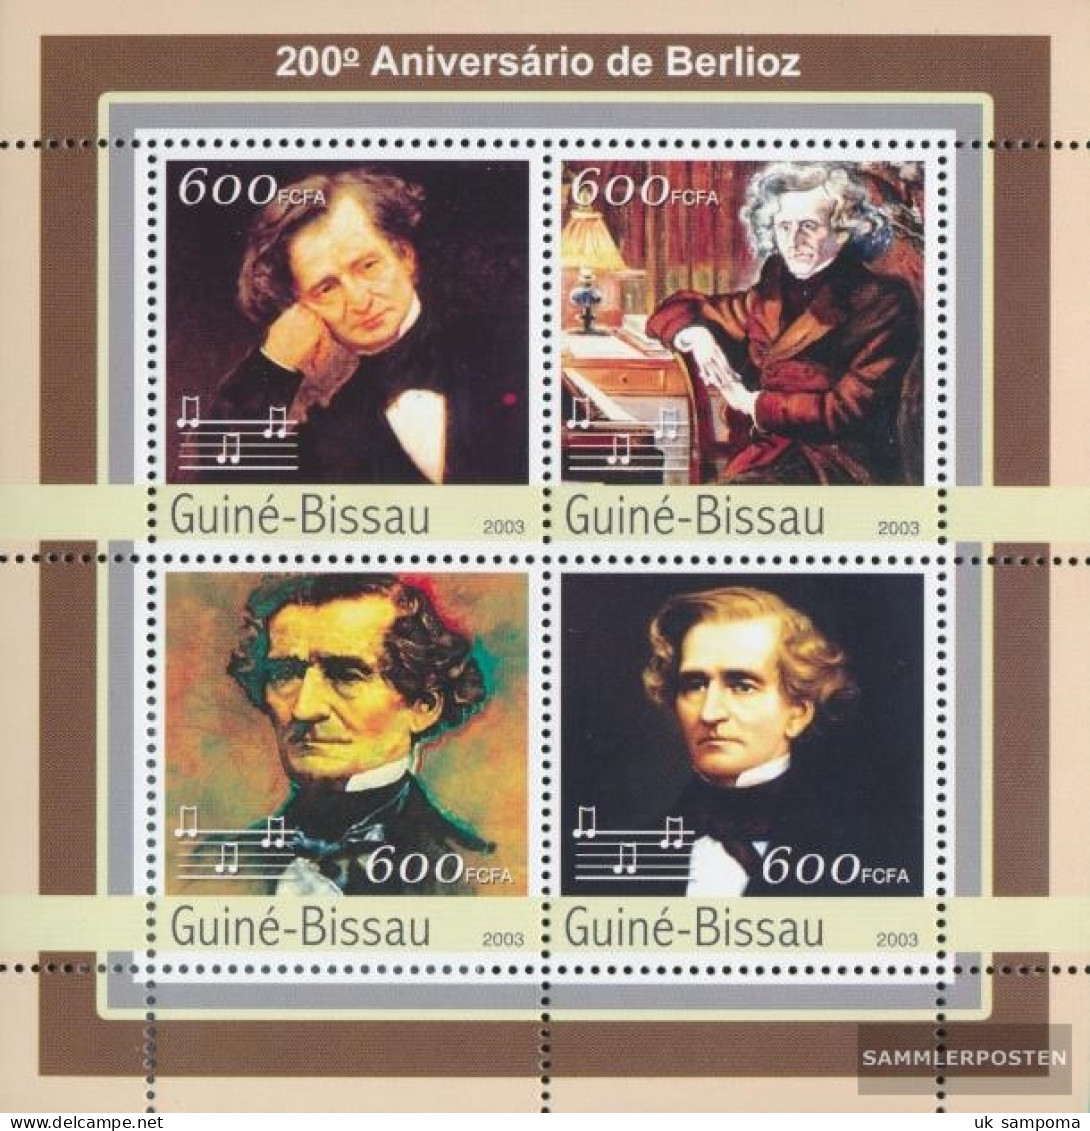 Guinea-Bissau 2160-2163 Sheetlet (complete. Issue) Unmounted Mint / Never Hinged 2003 Hector Berlioz - Guinea-Bissau